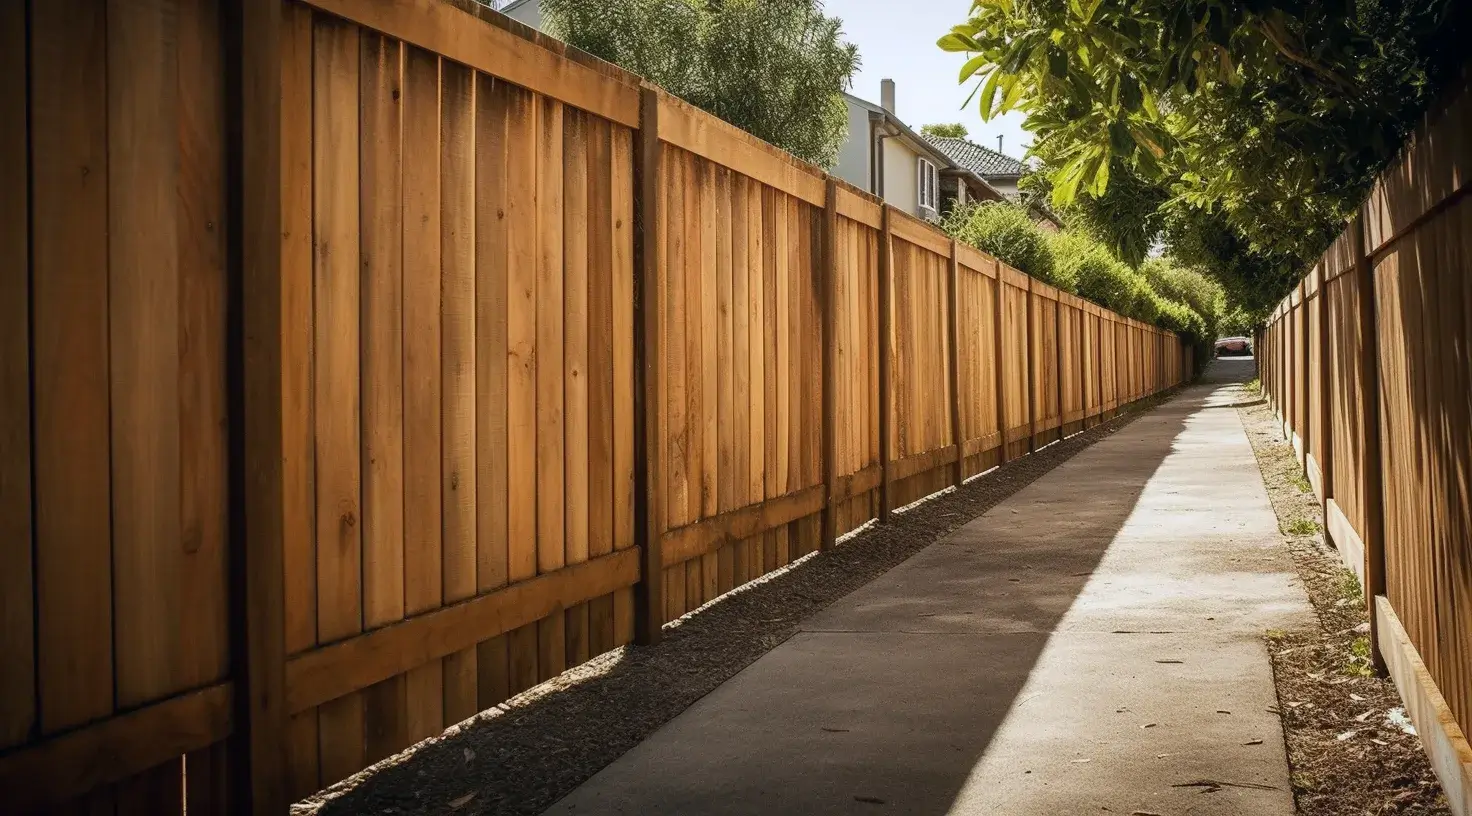 A pathwalk in Ballarat with timber fence